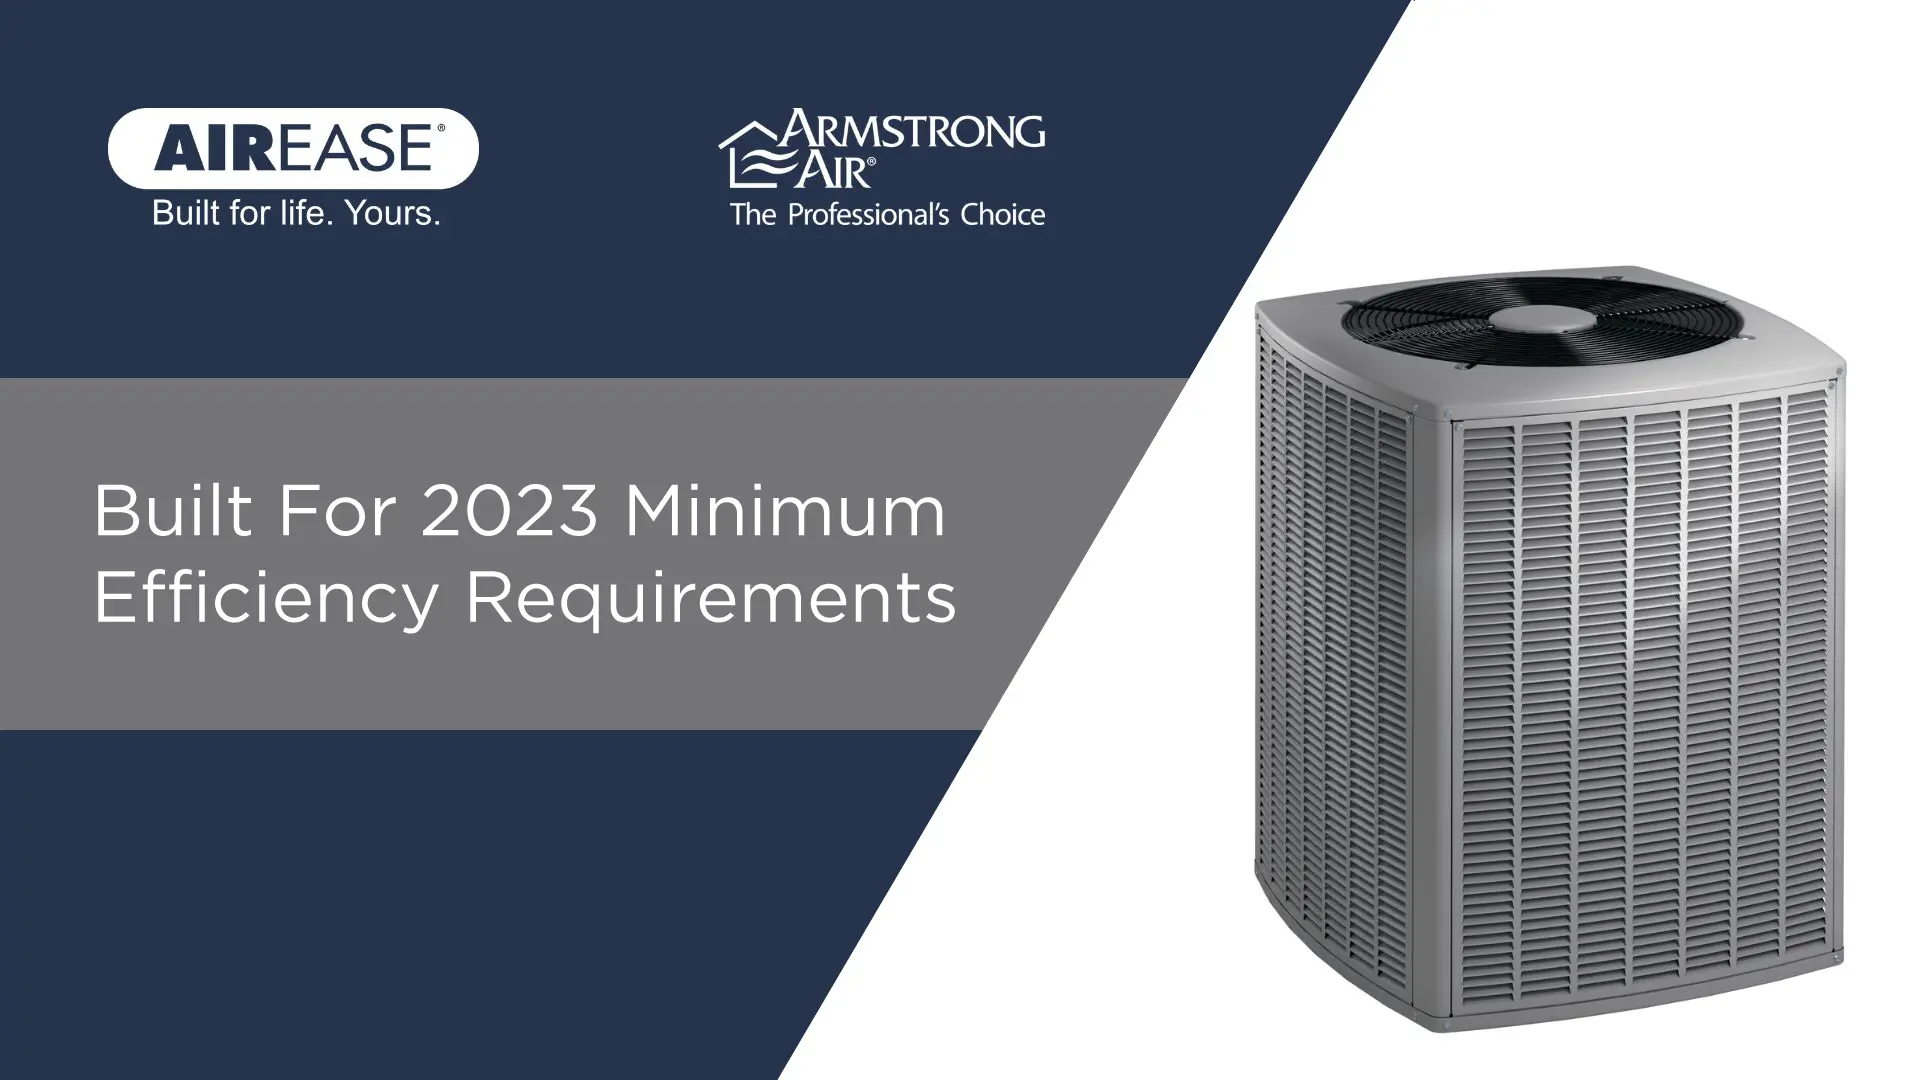  Allied Air Enterprises Helps Distributors Get Ahead of the Curve with Early Introduction of Armstrong Air® and AirEase™ 17 SEER AC Units 